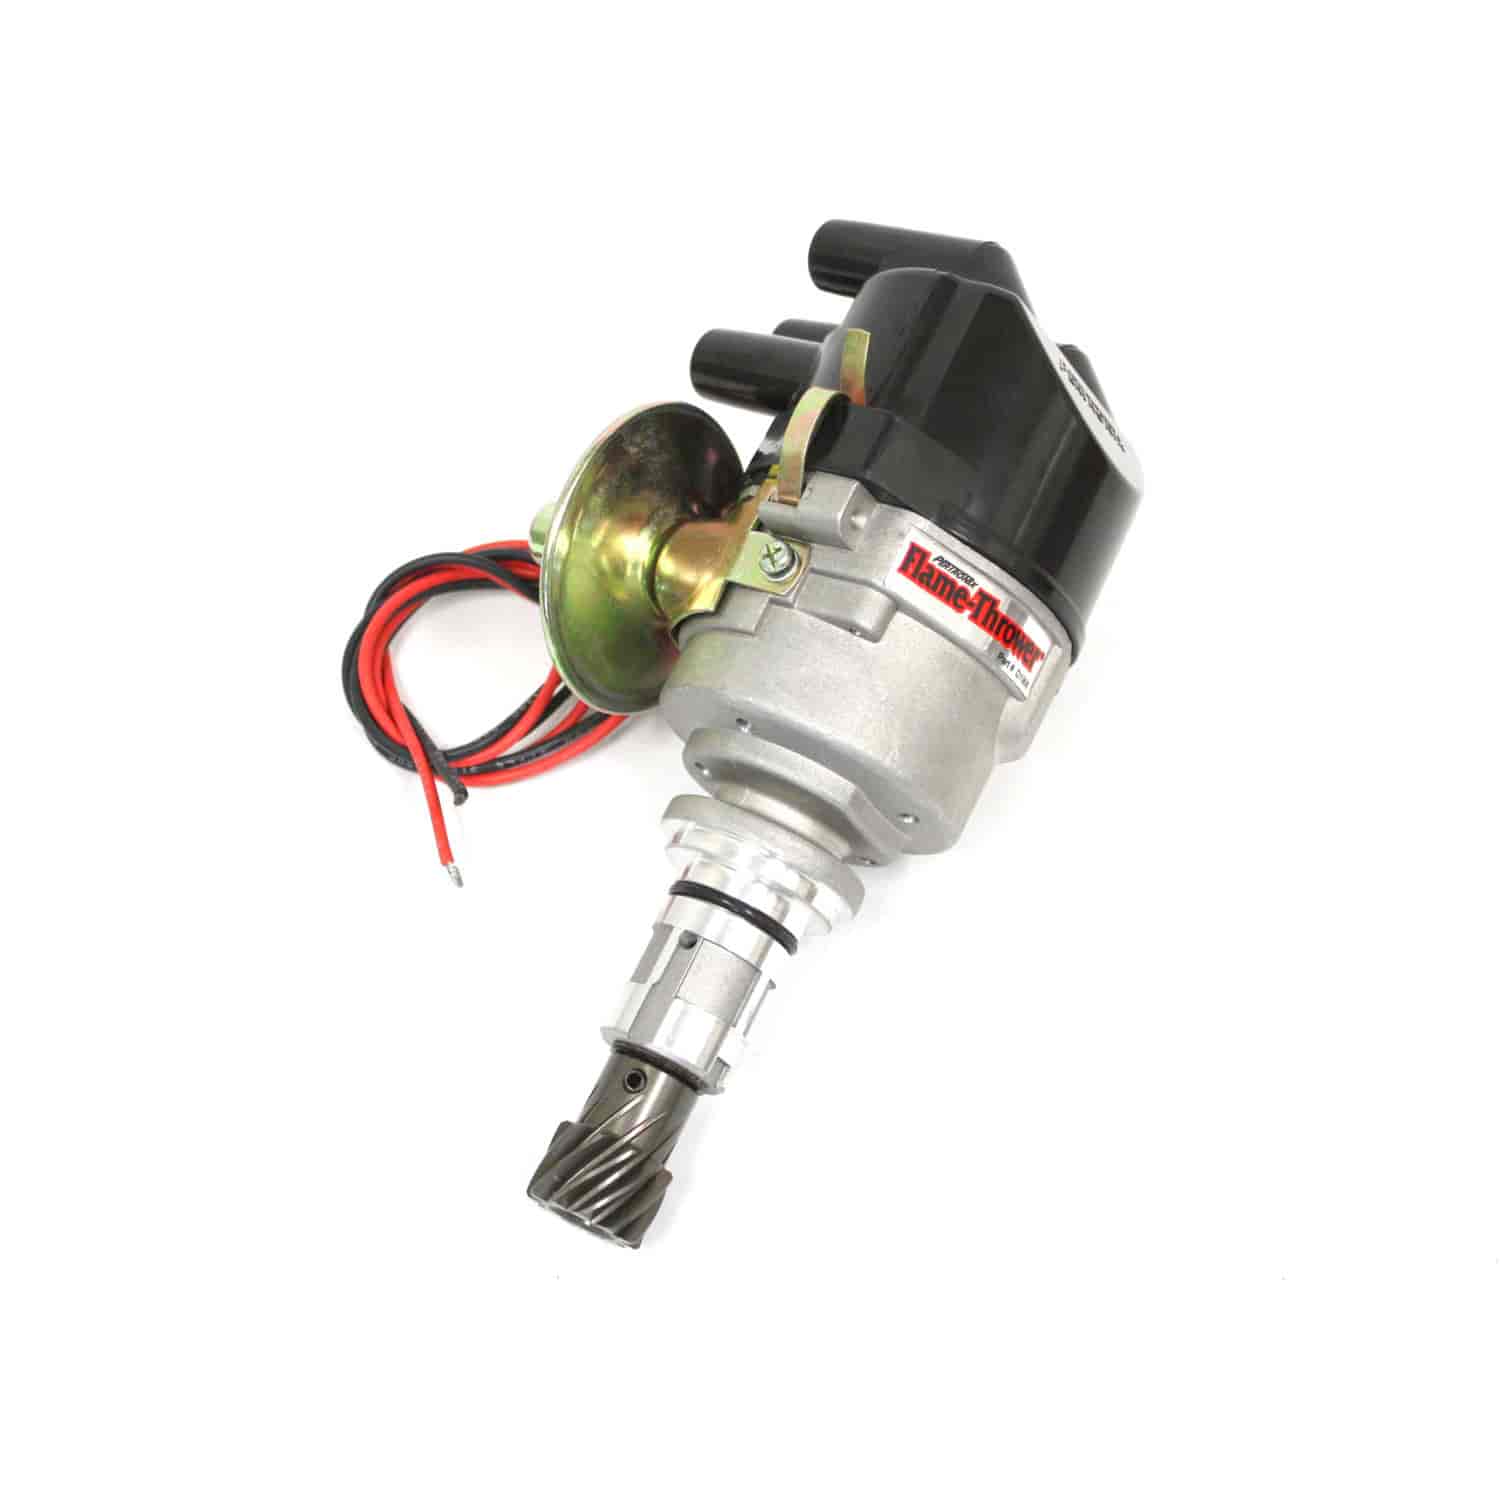 Flame Thrower Cast Distributor Ford X-Flow